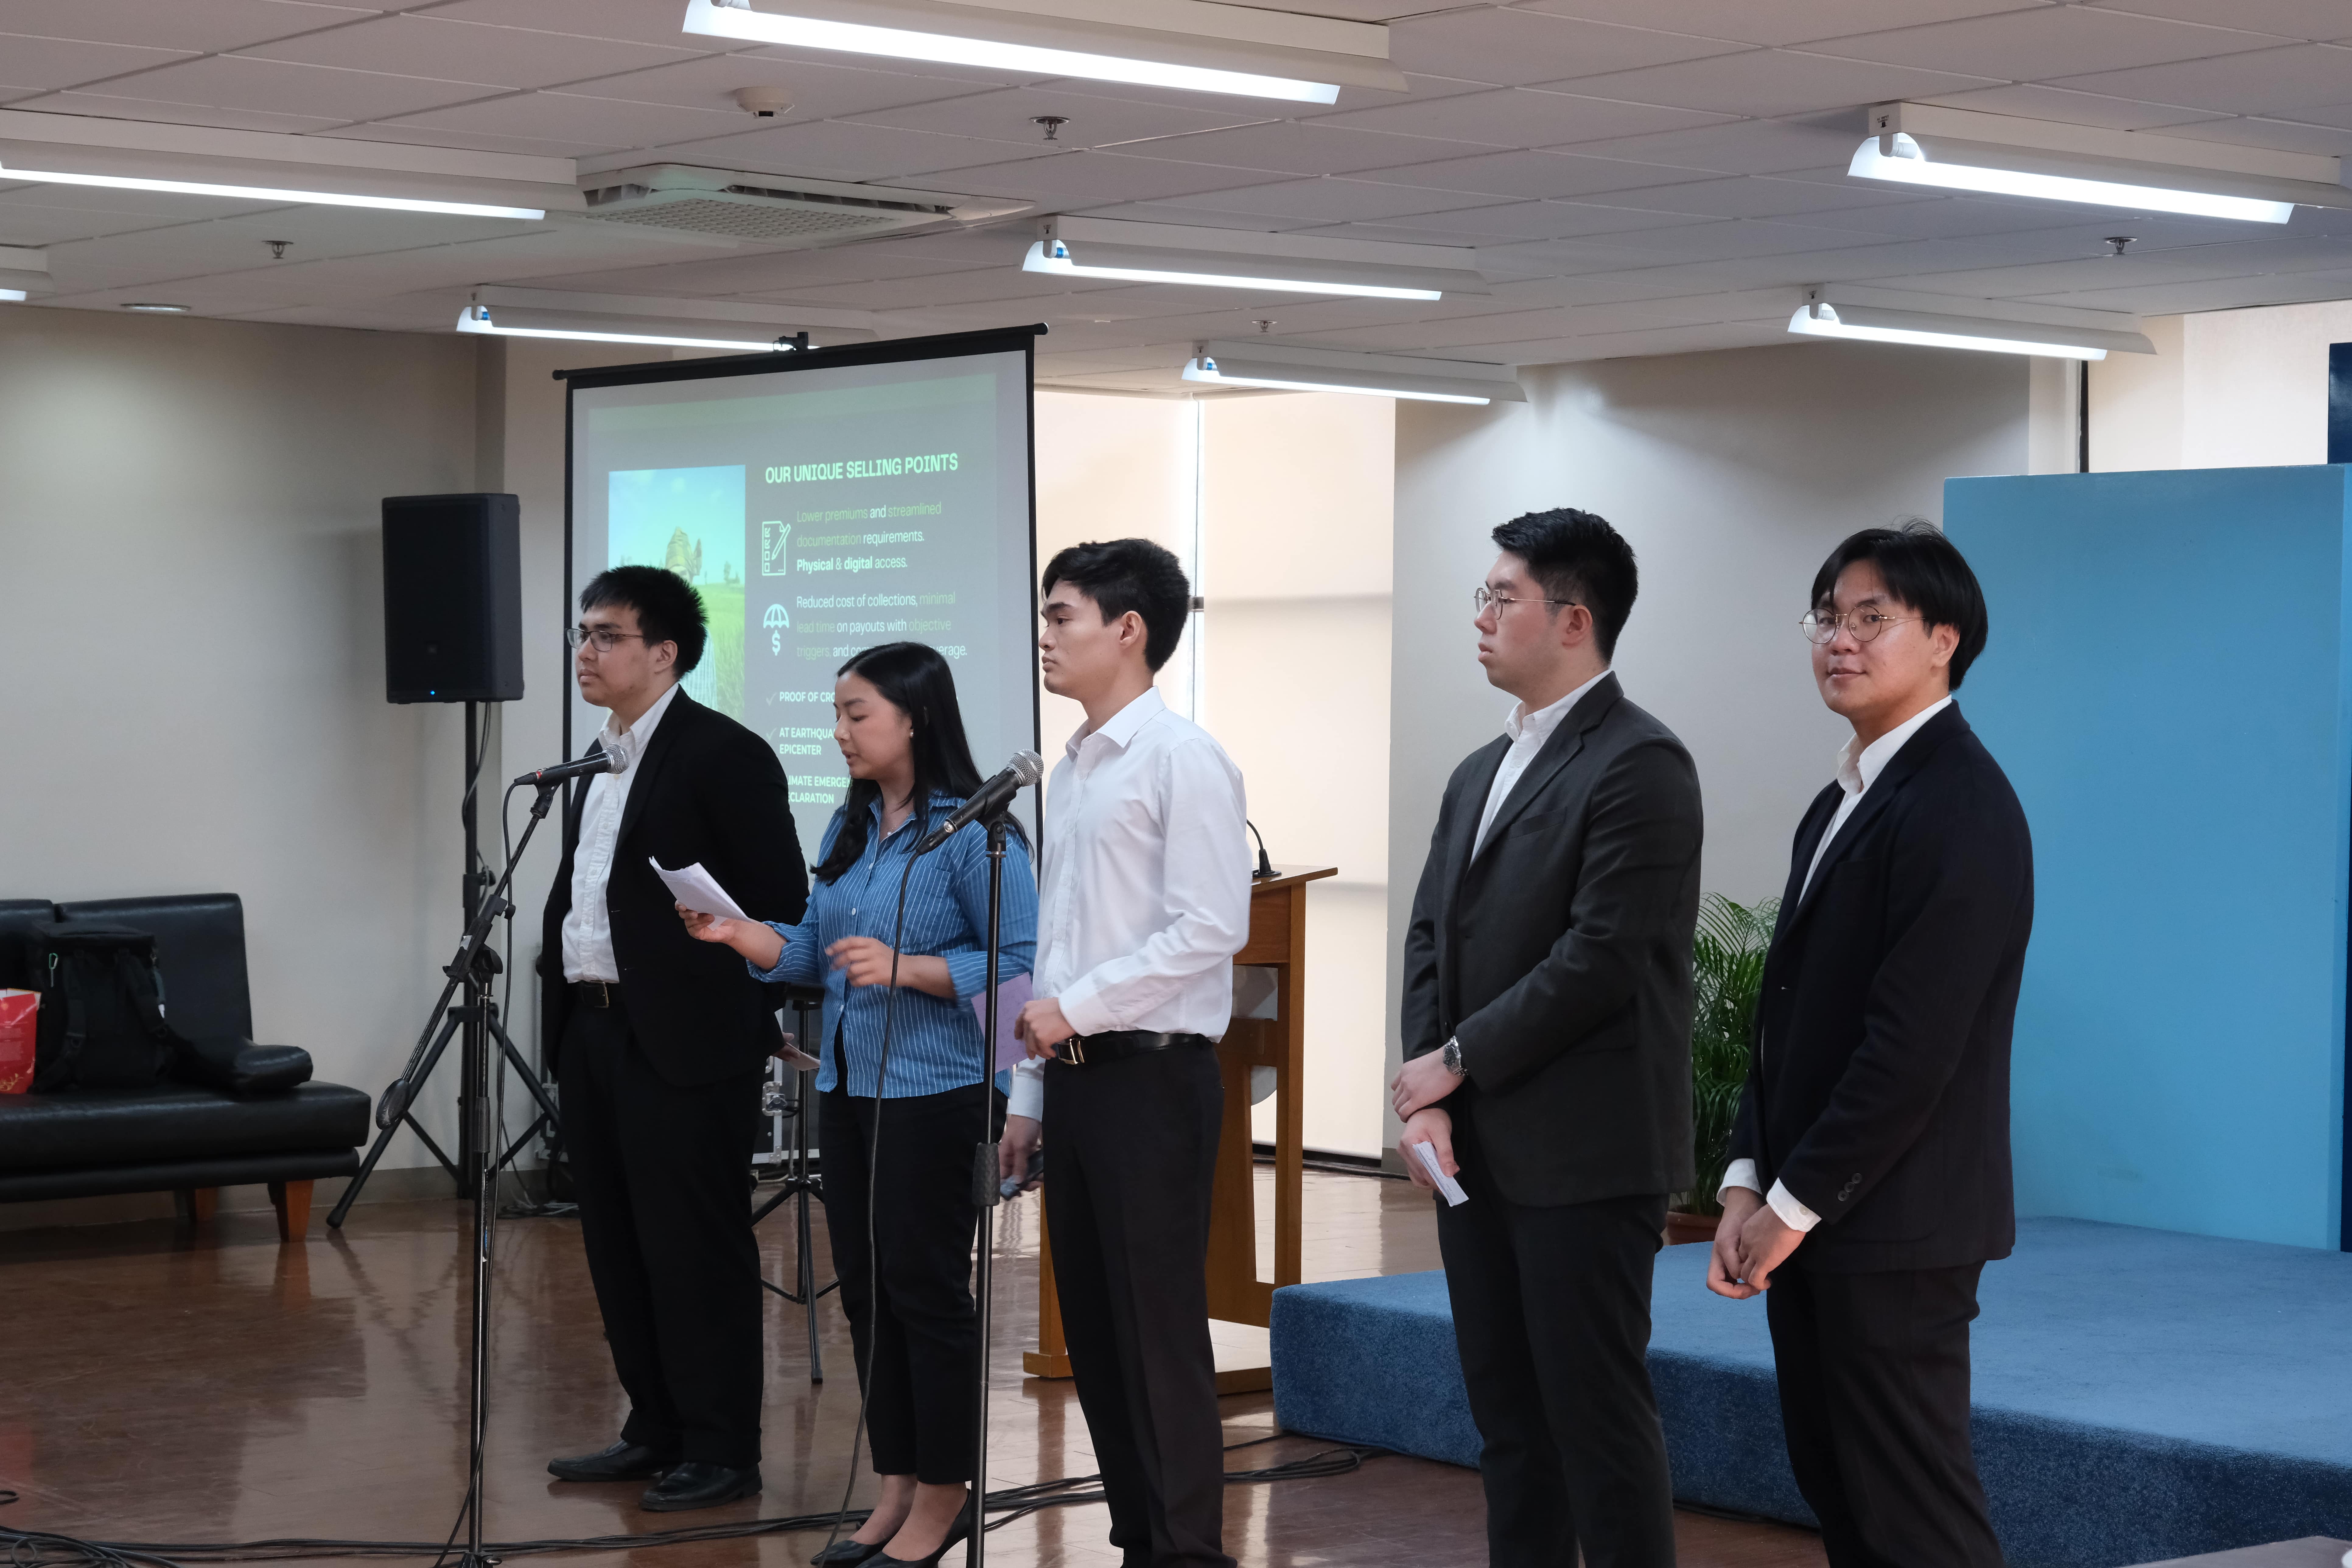 Students present their sustainability solution